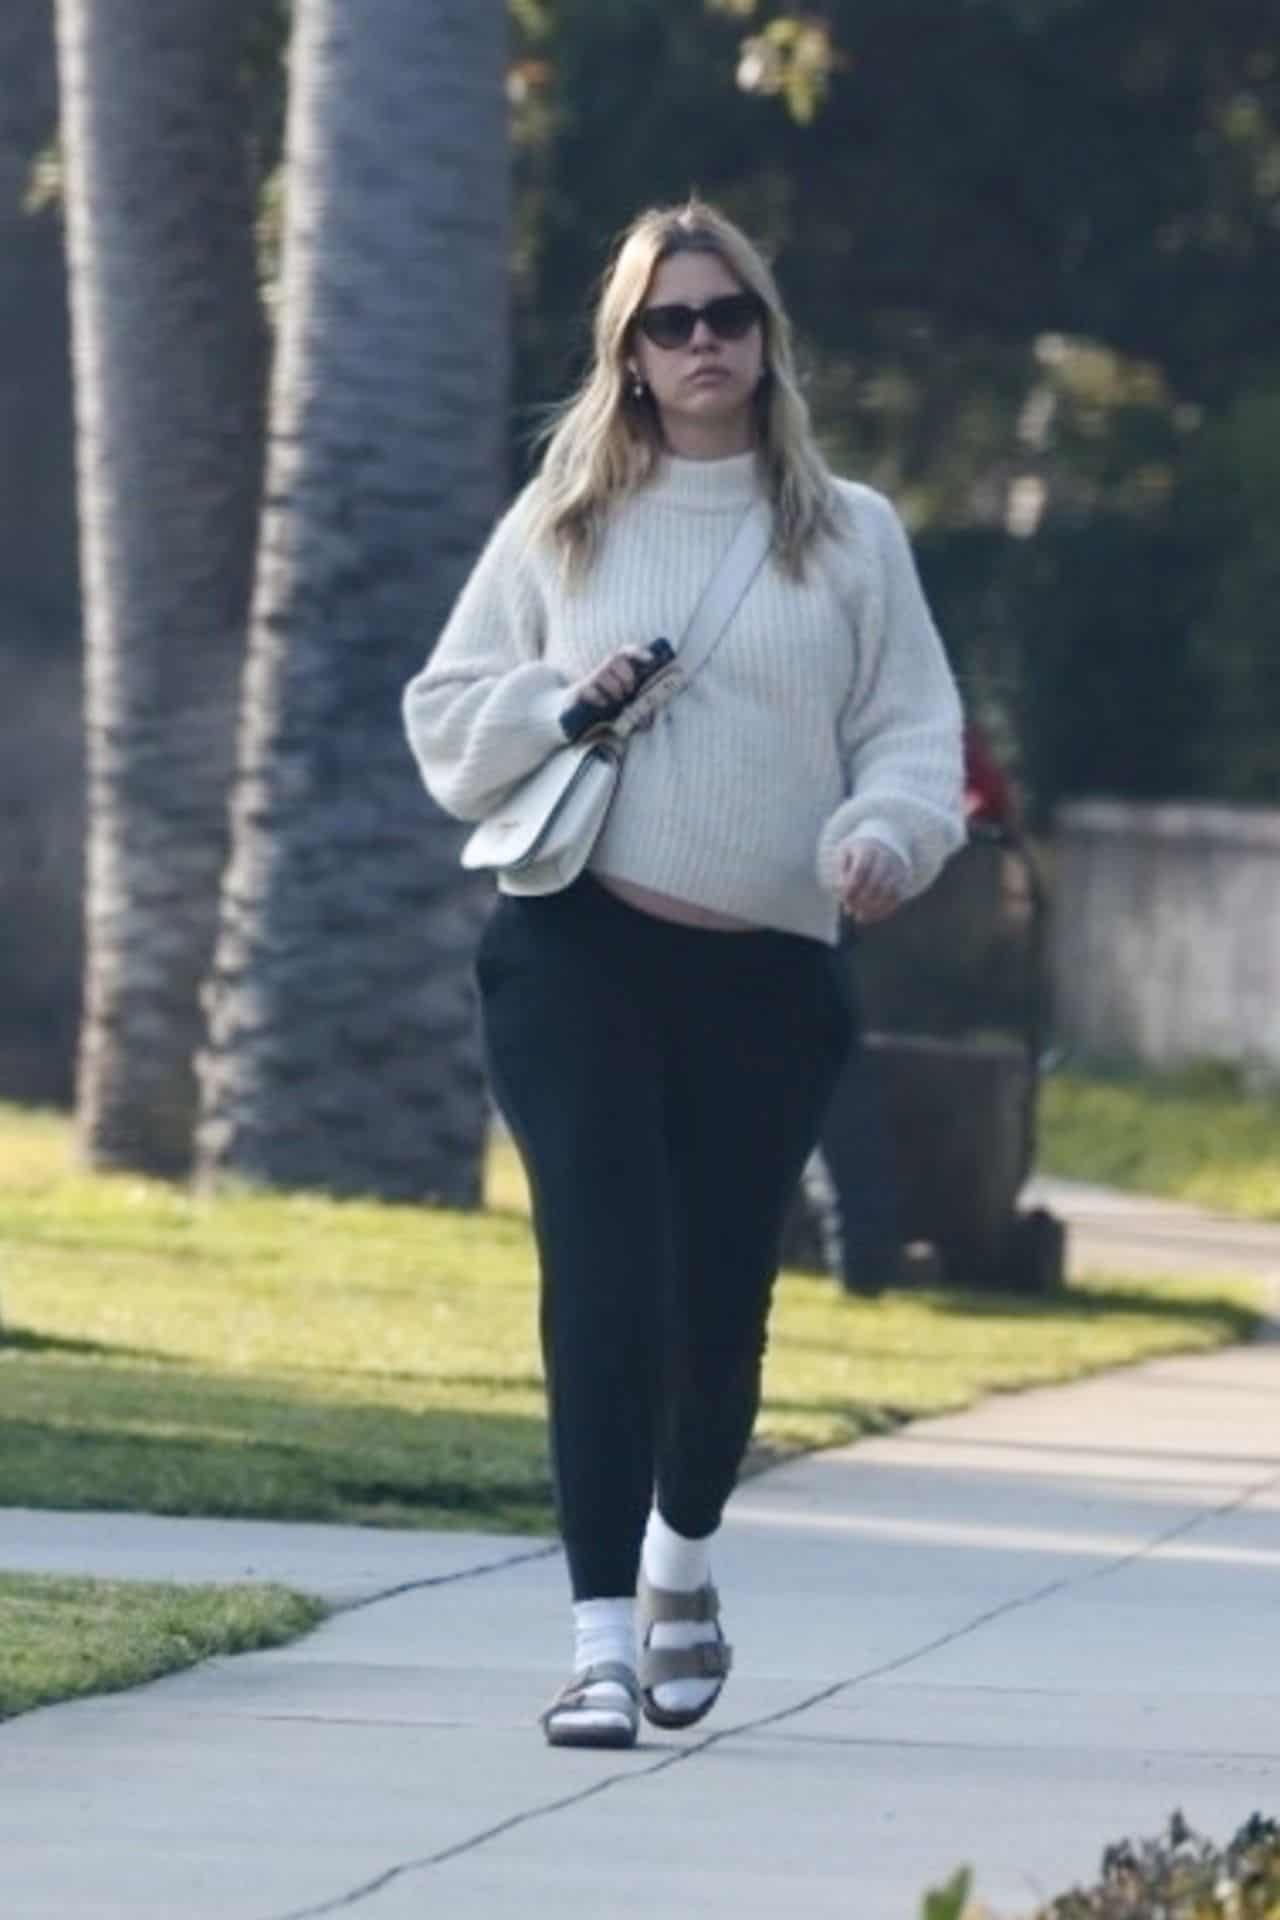 Mia Goth Shows Off her Growing Baby Bump During the Nice Stroll in Pasadena